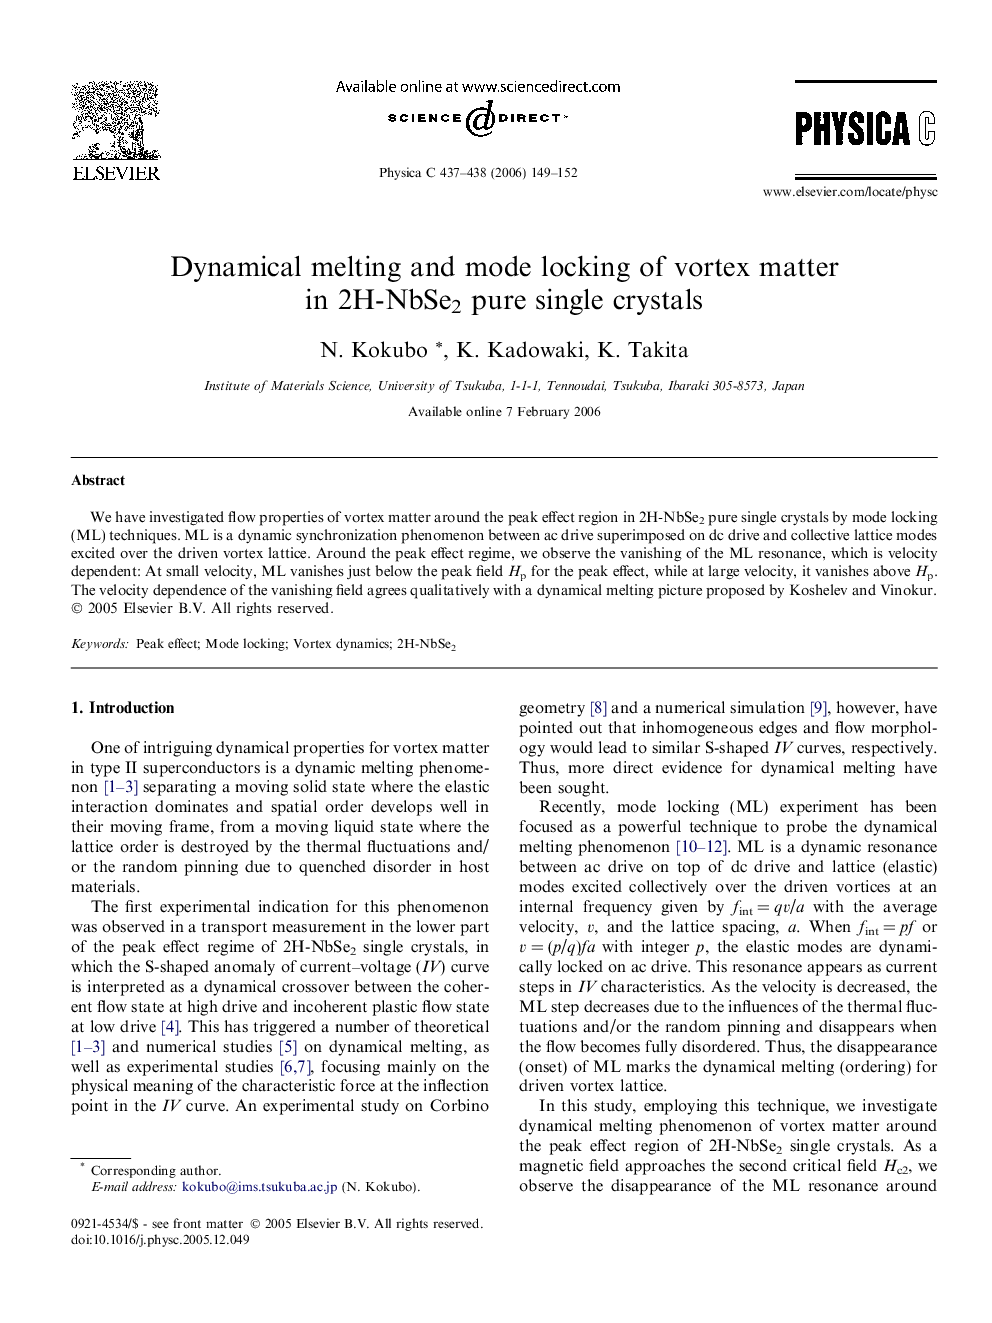 Dynamical melting and mode locking of vortex matter in 2H-NbSe2 pure single crystals